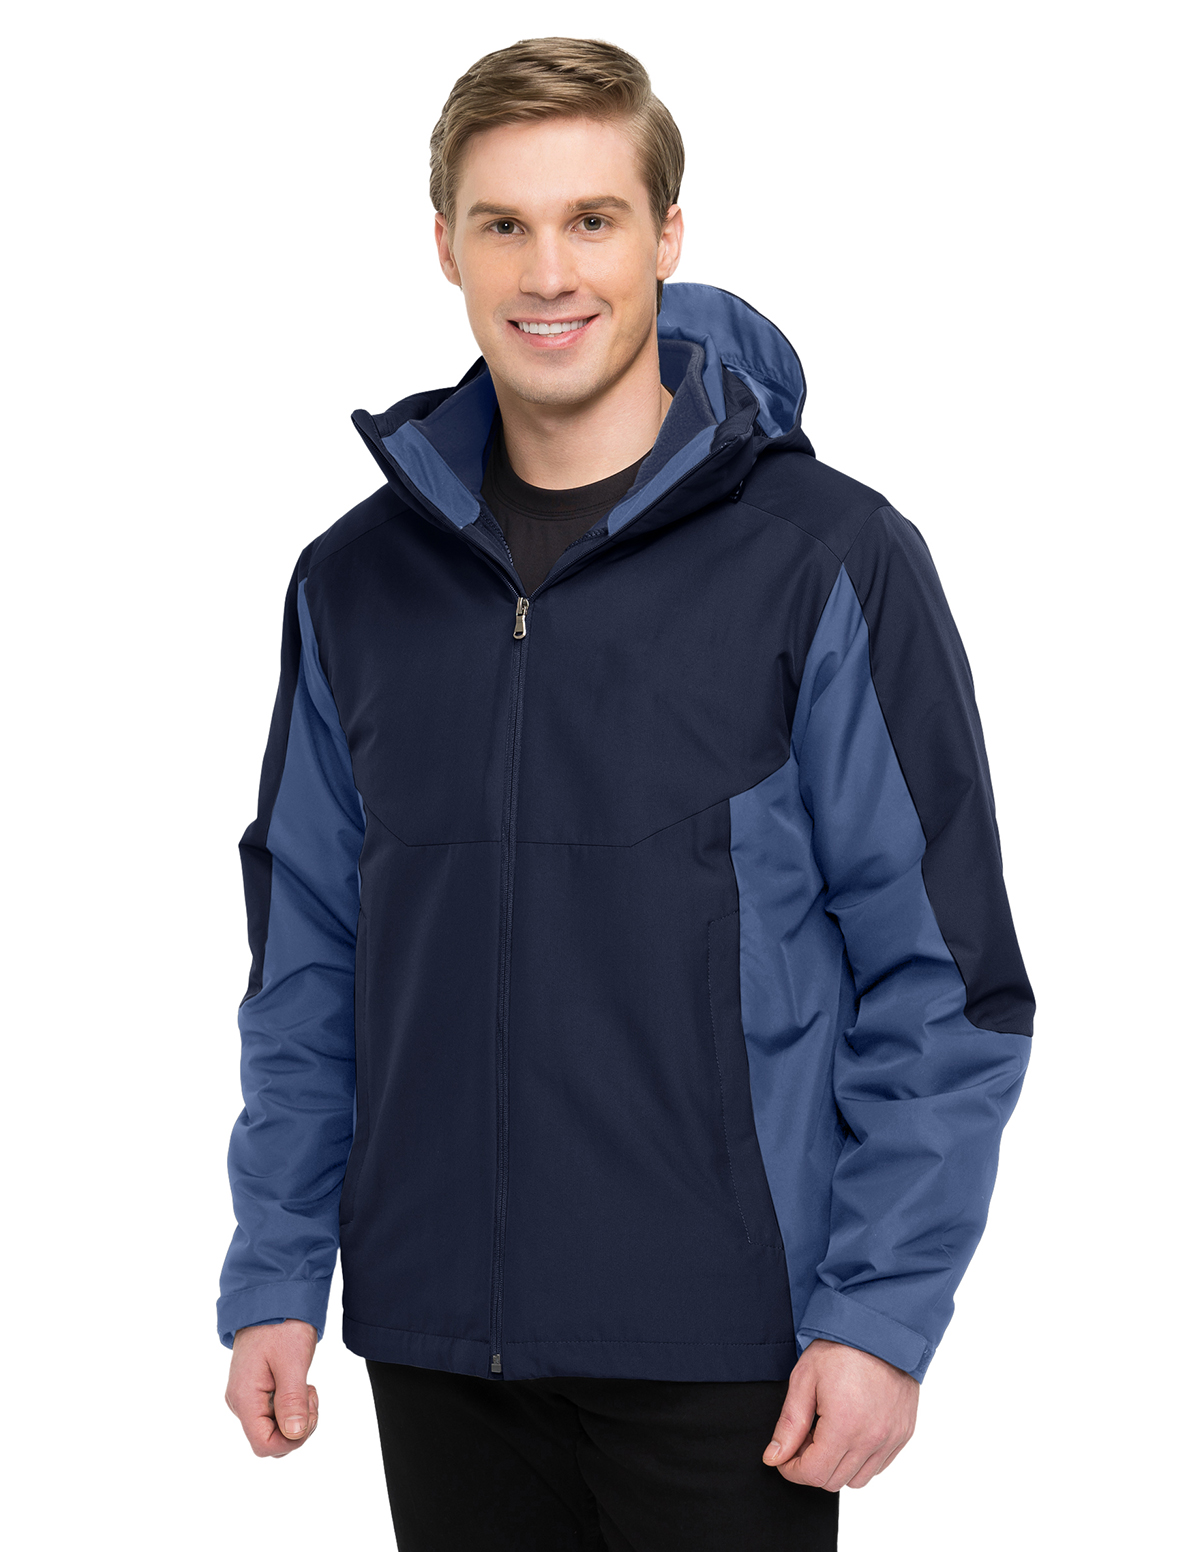 click to view NAVY / MOUNTAIN BLUE / NAVY